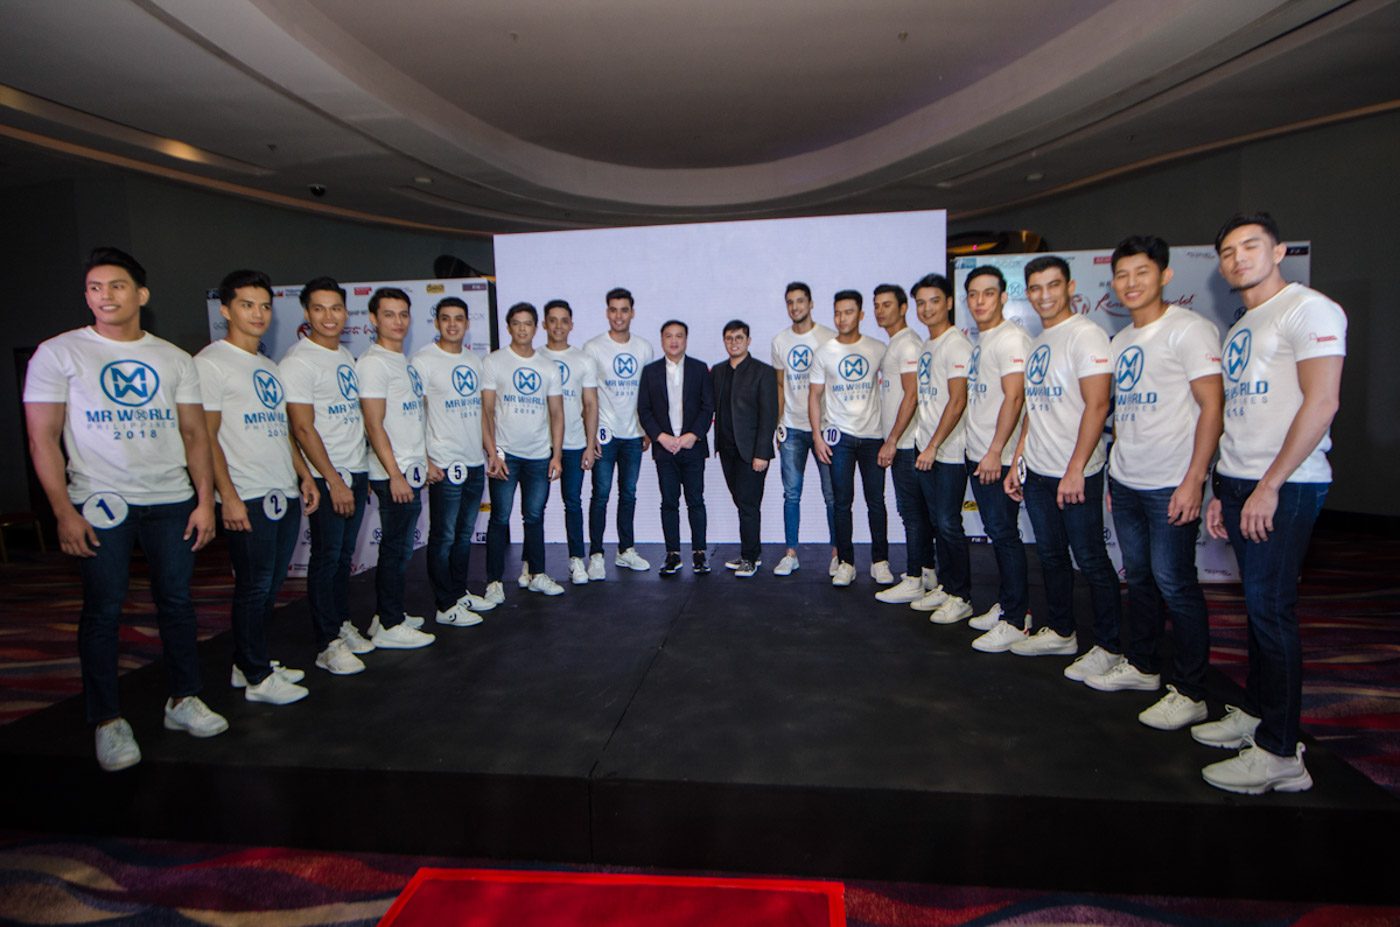 IN PHOTOS: Meet the 16 candidates of Mr World Philippines 2018